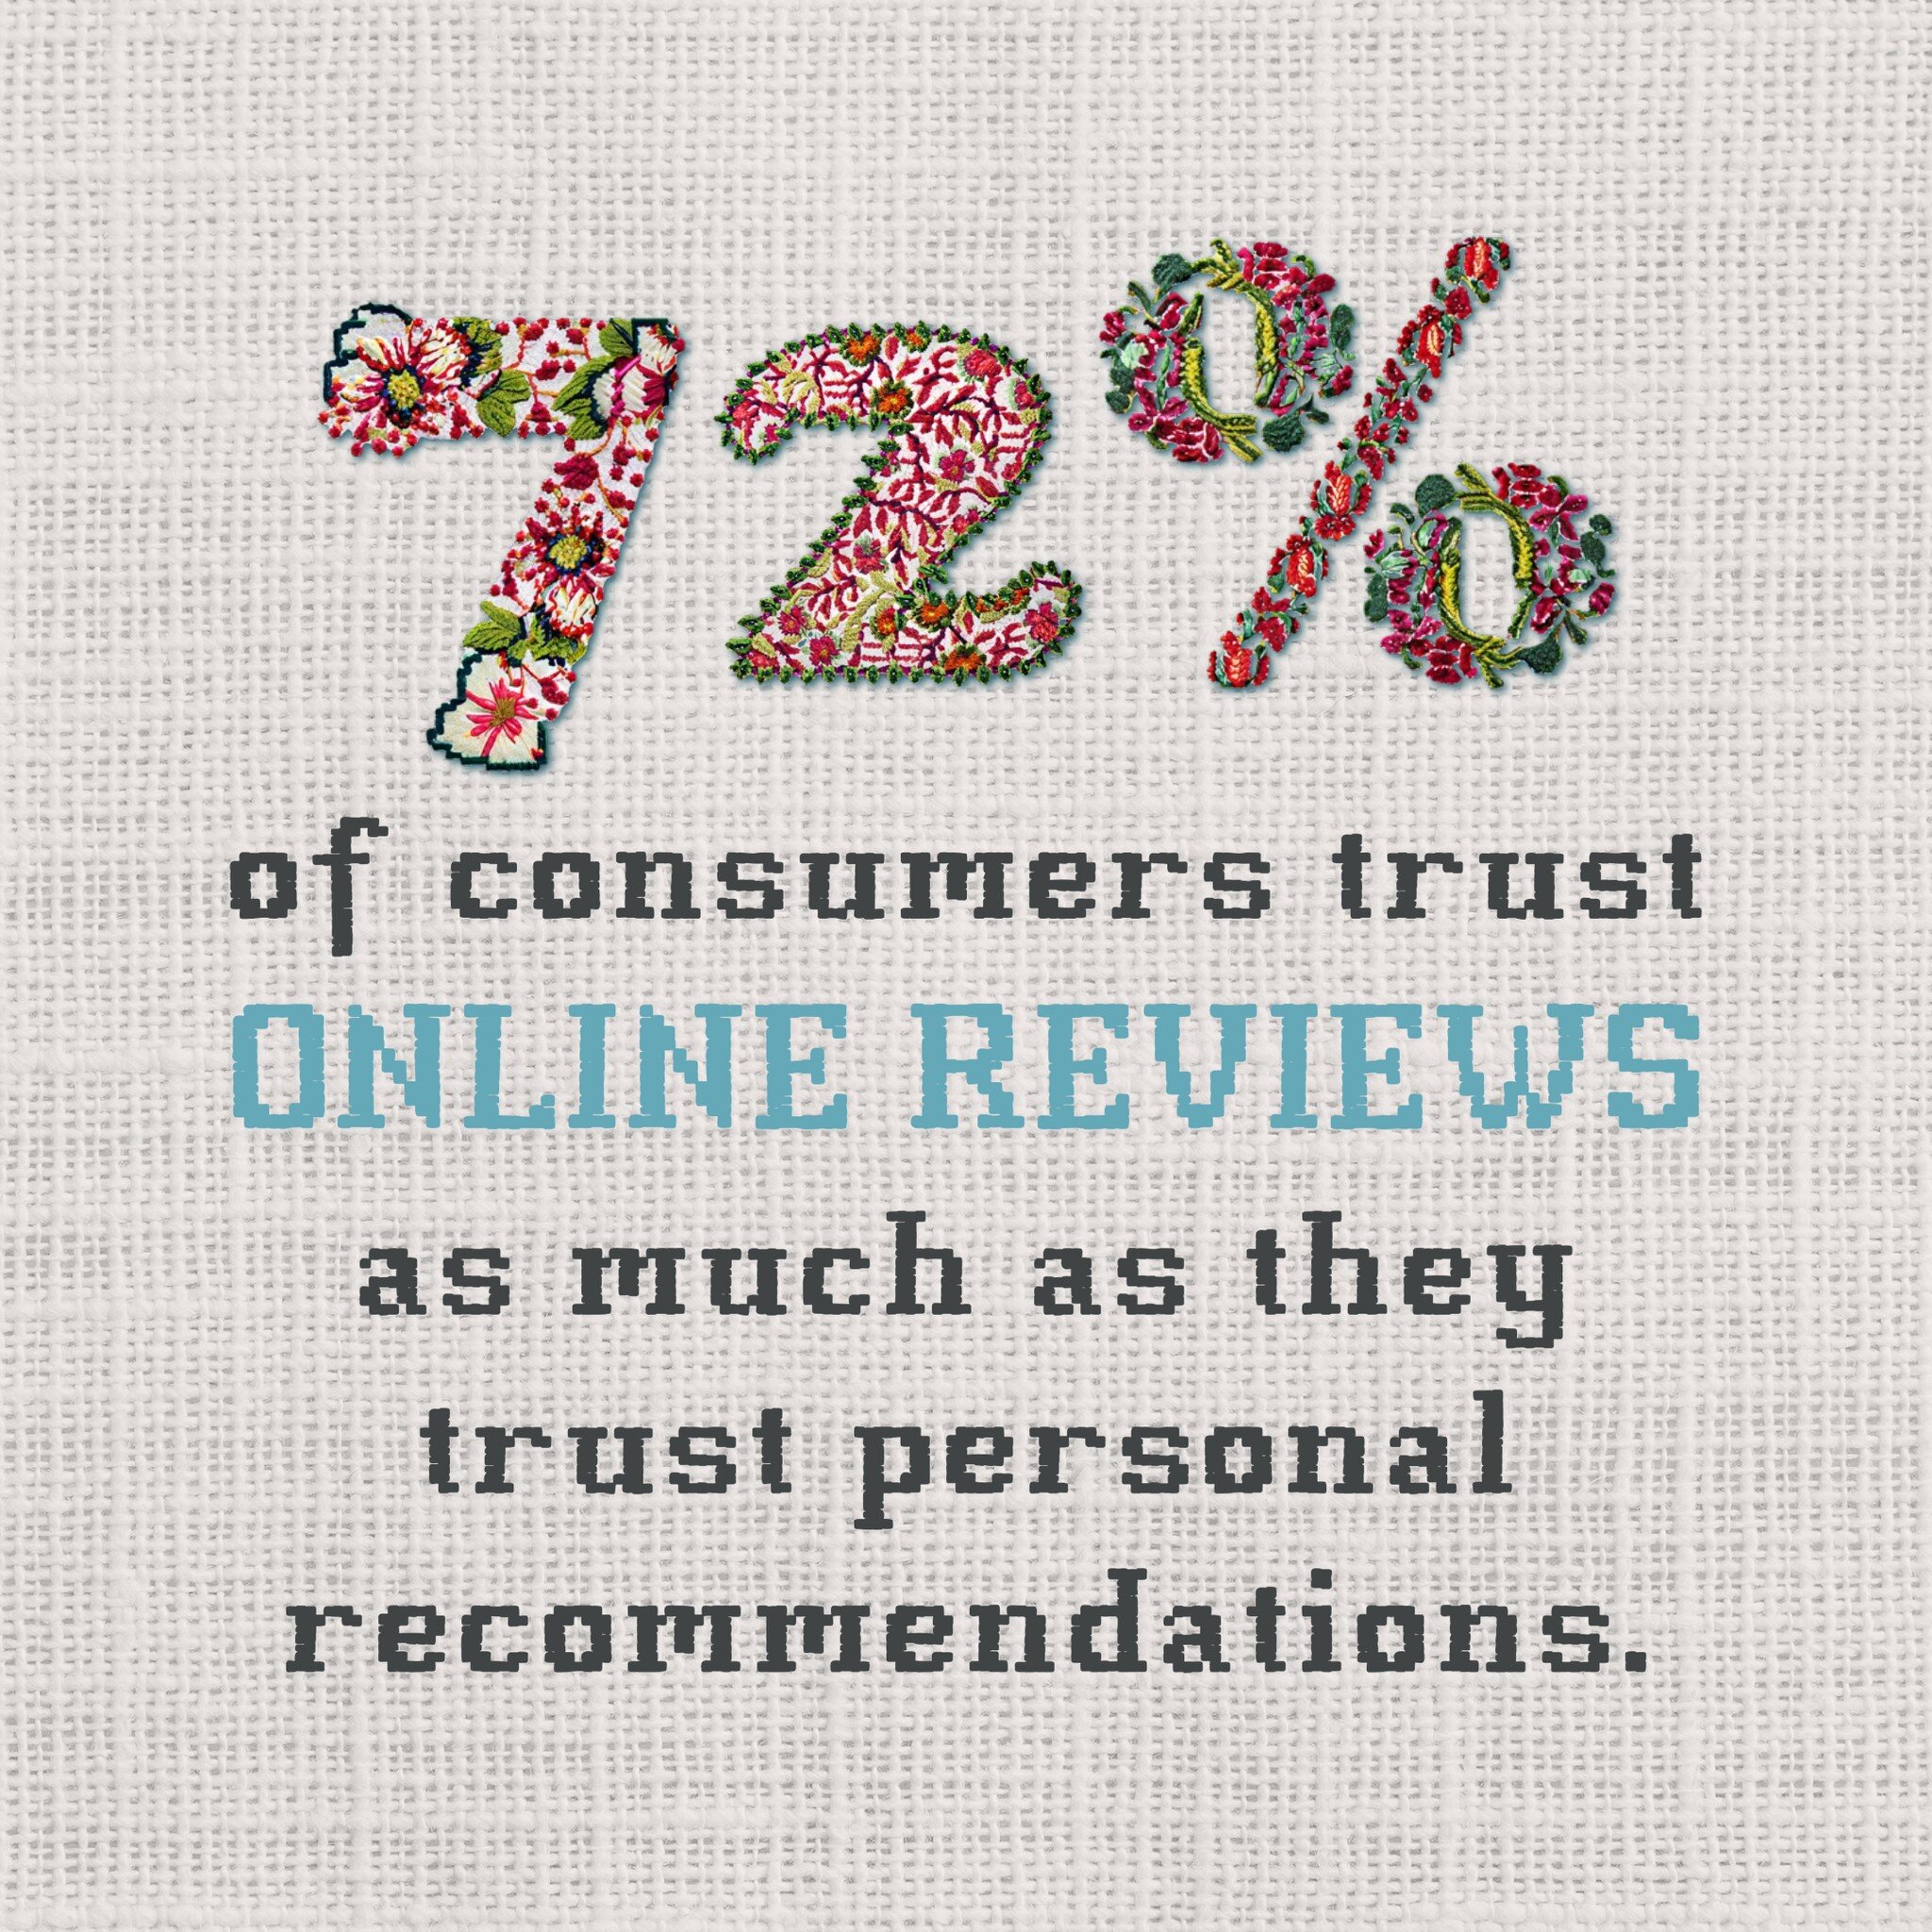 Did you know? 🧵 72% of consumers trust online reviews just as much as personal recommendations! Your feedback matters more than you think. If you've had a positive experience with Blue Honey Rose, we'd love to hear from you! Leave us a review and he